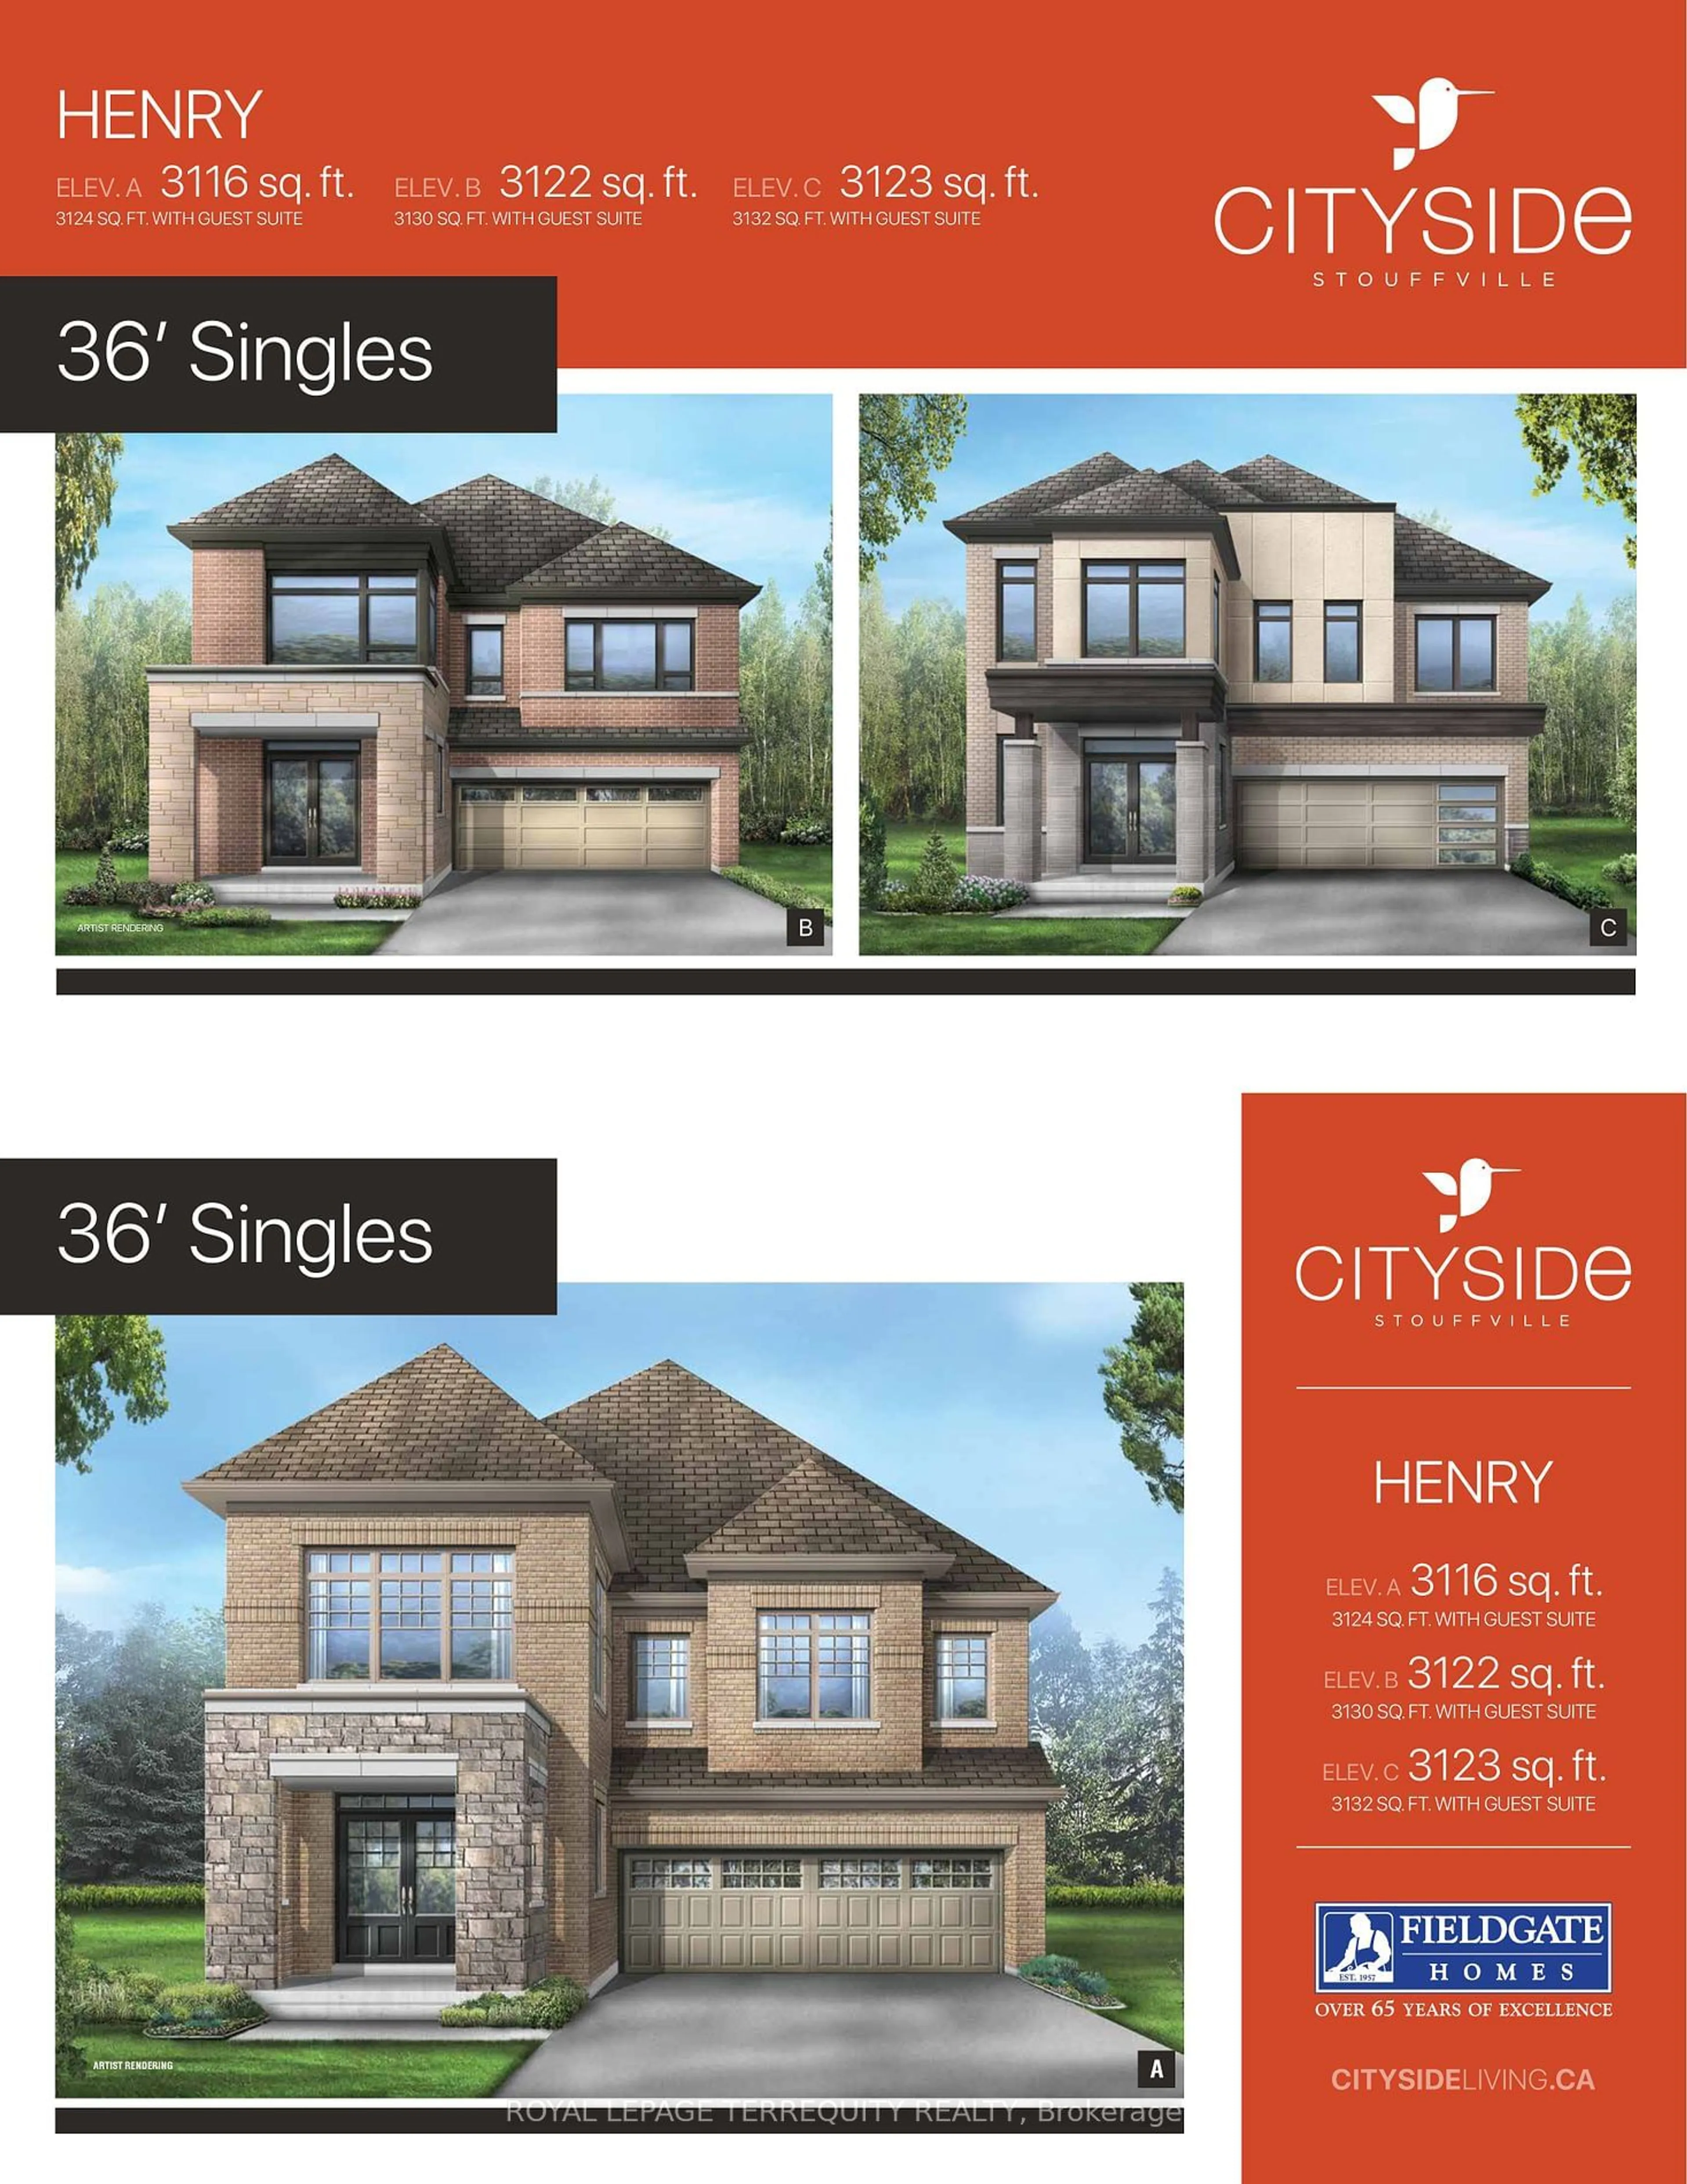 Frontside or backside of a home for 226 Mckean Dr, Whitchurch-Stouffville Ontario L4A 0S1